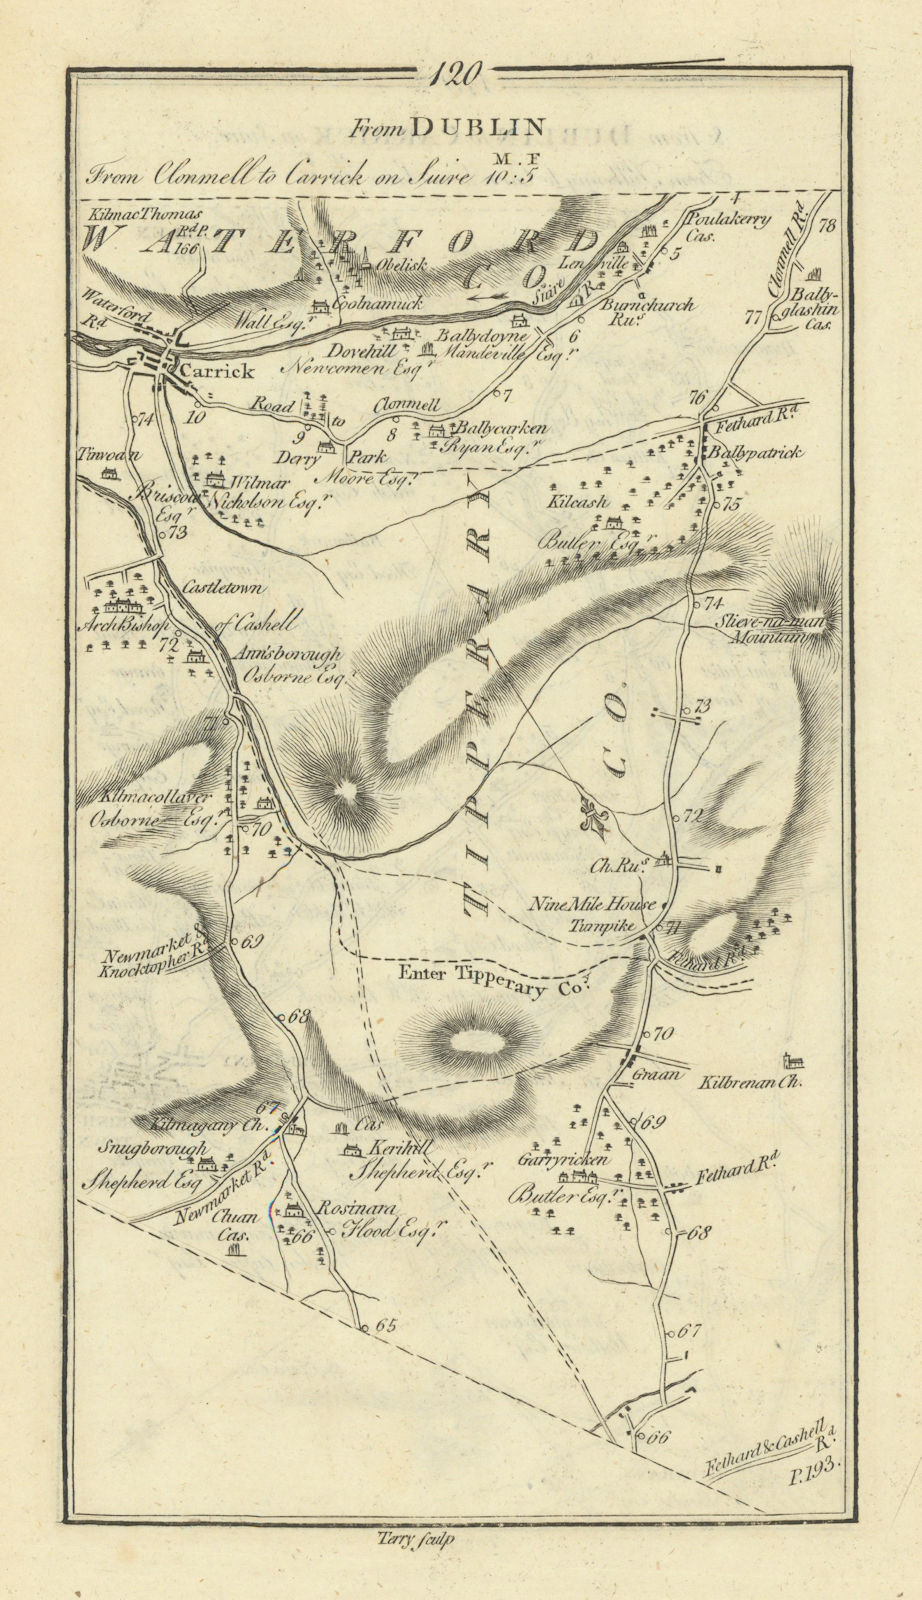 Associate Product #120 From Dublin. Clonmell to Carrick-on-Suir. Killamery TAYLOR/SKINNER 1778 map